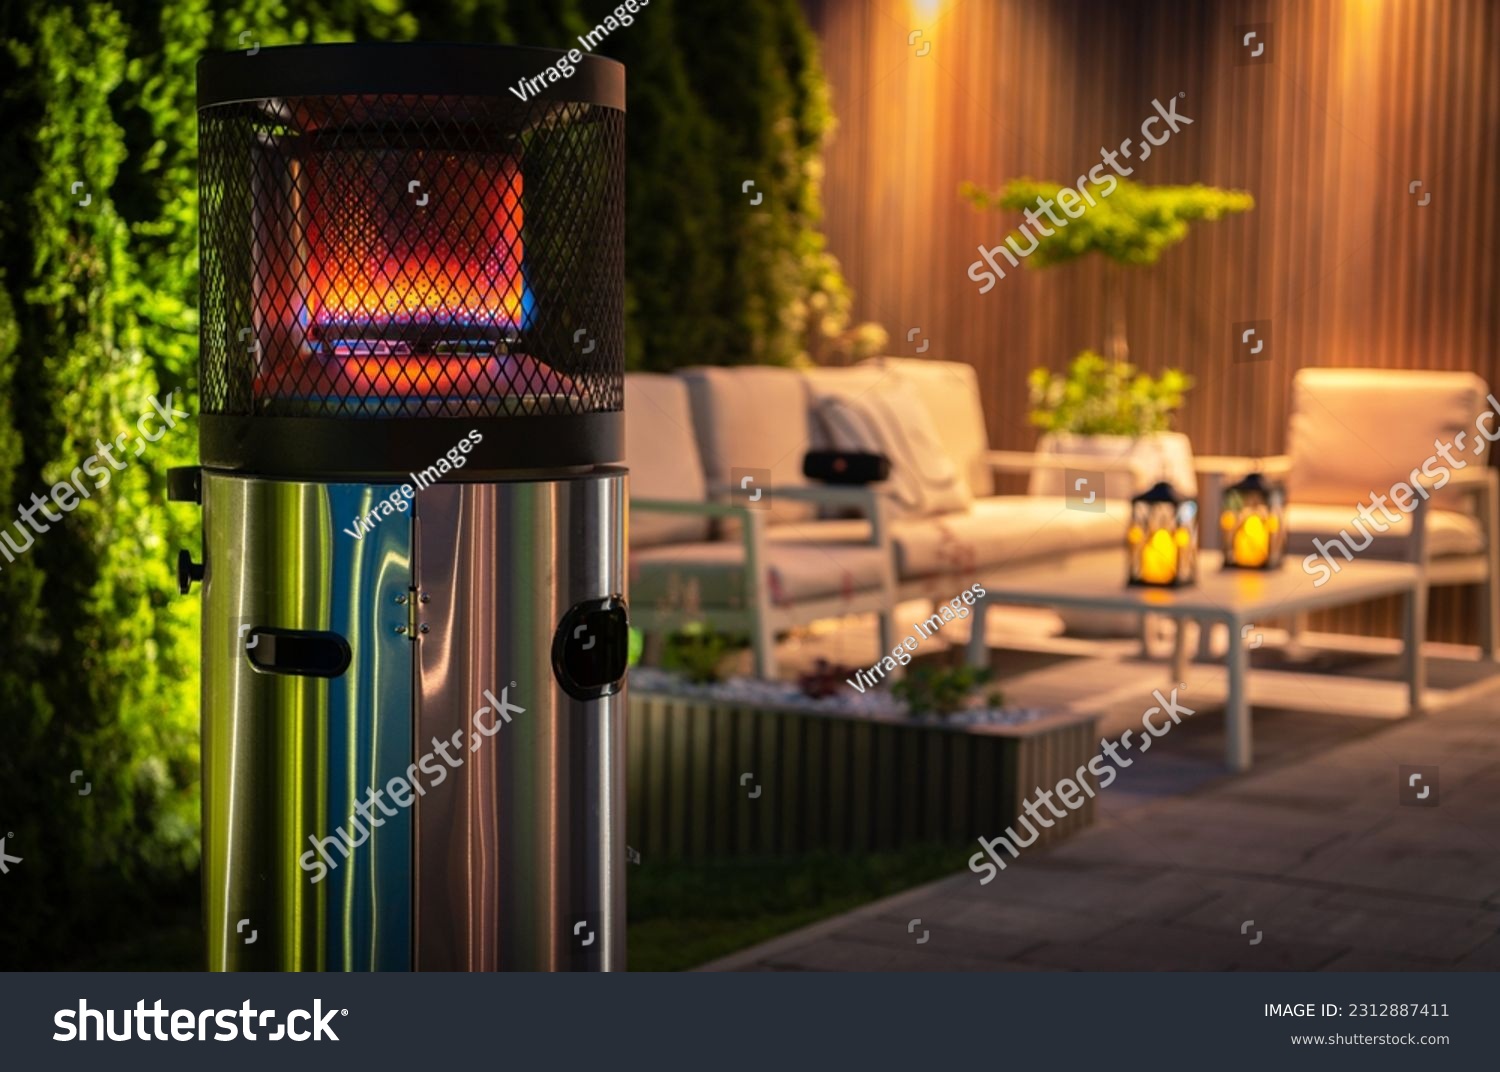 Outdoor Patio Propane Gas Heater For Cold Evenings in Garden Area. Burning Heater in Front of Outdoor Relaxing Area During Night Time. #2312887411